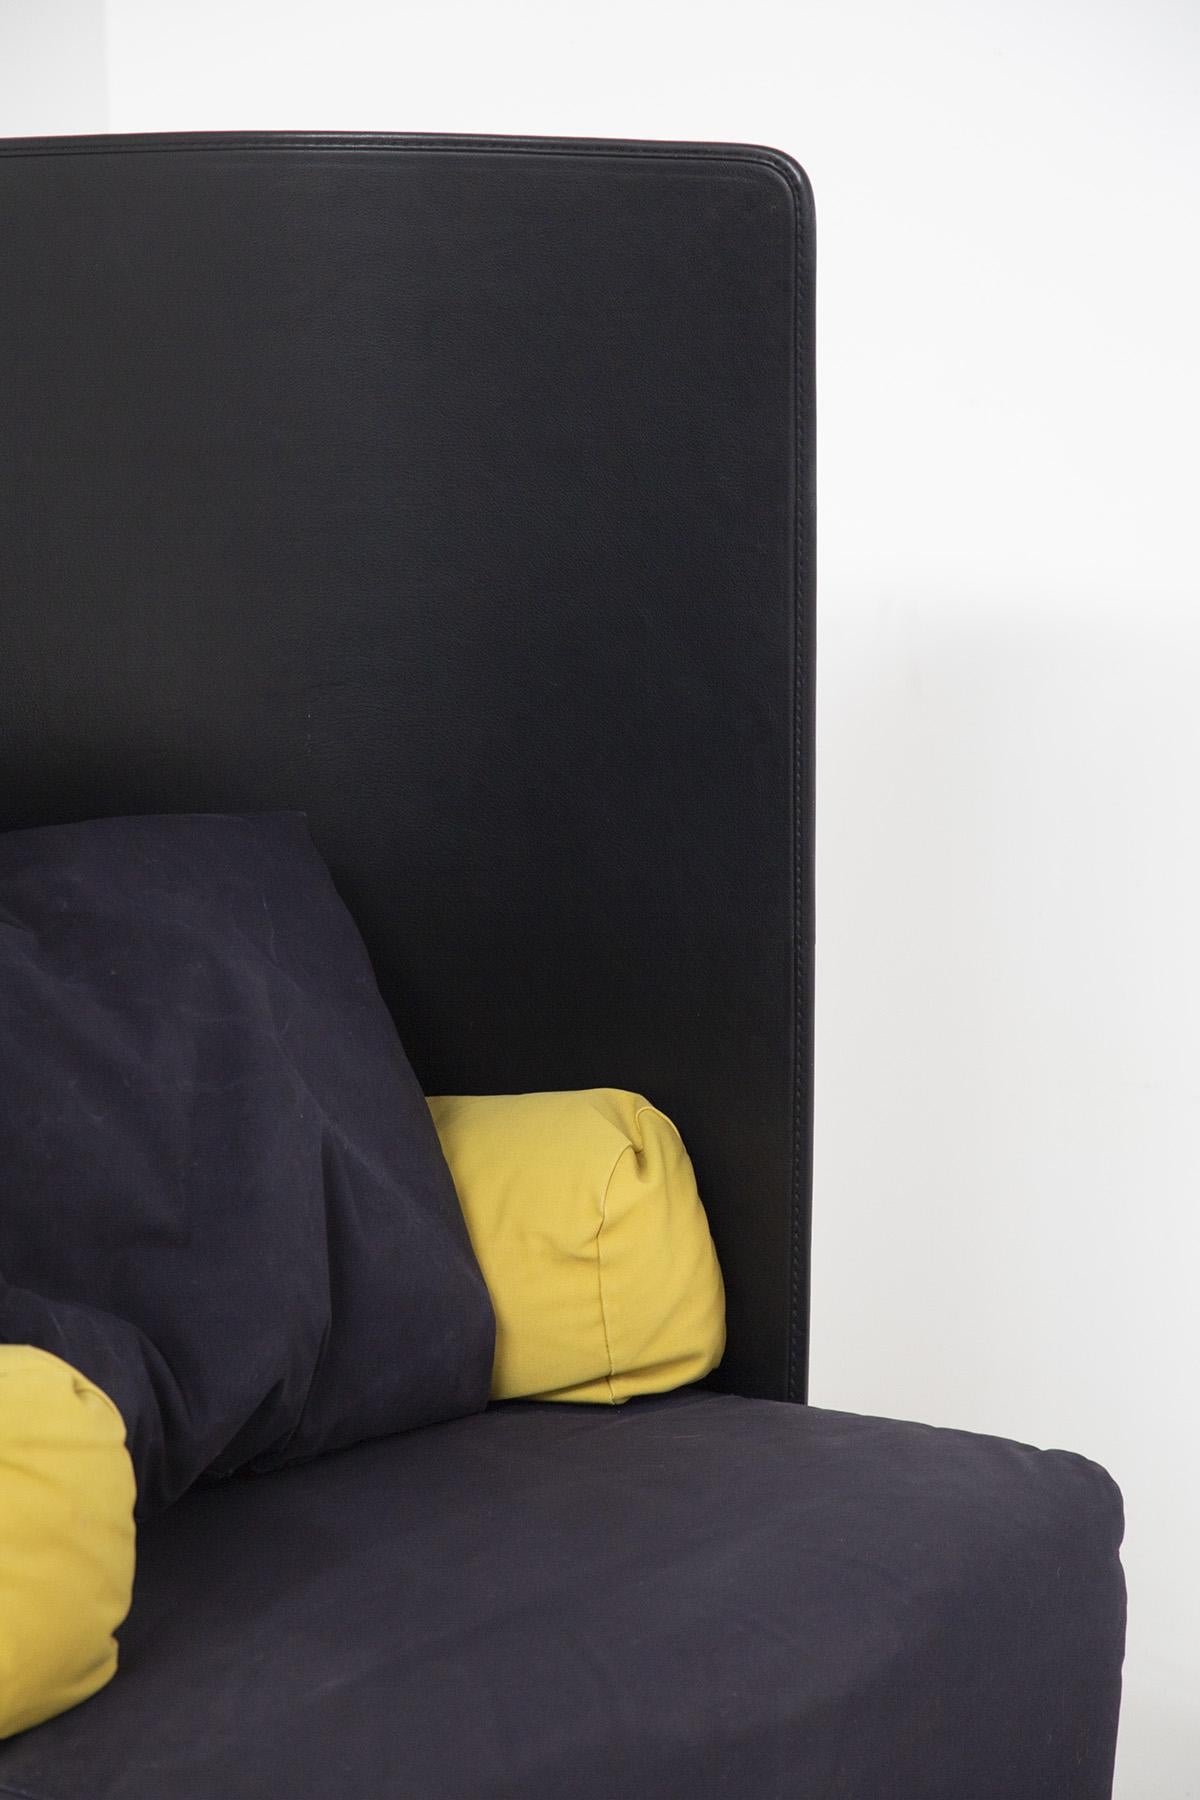 De Pas, D'Urbino and Zanotta Black and Yellow Armchairs For Sale 2